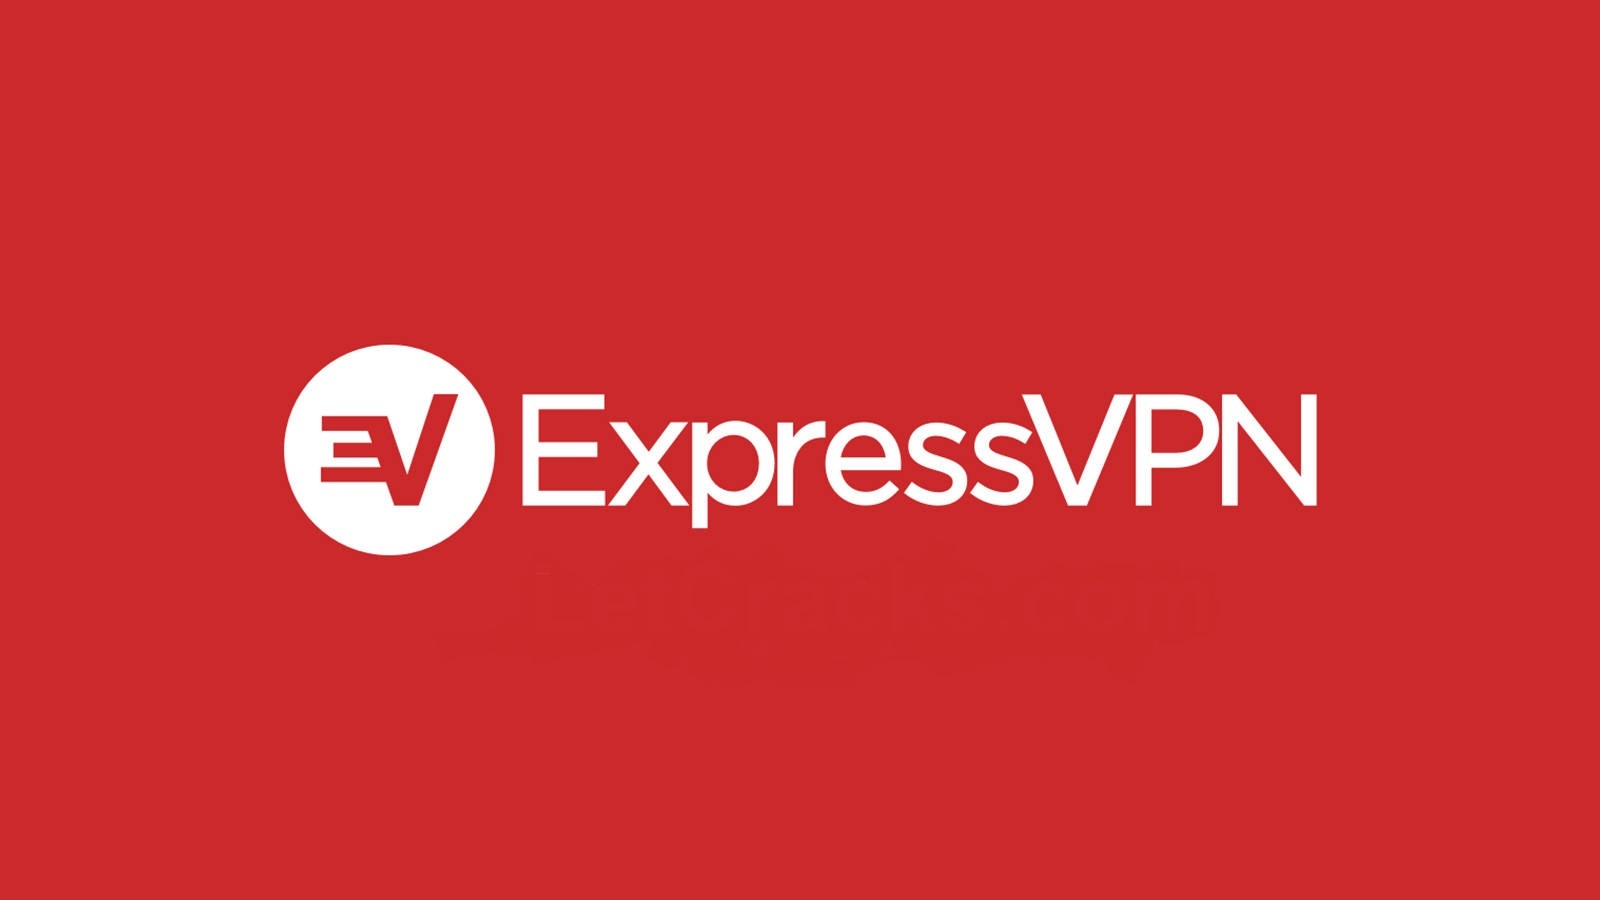 Express VPN 2020 Crack With Serial Key Free Full Download{Fresh Copy}